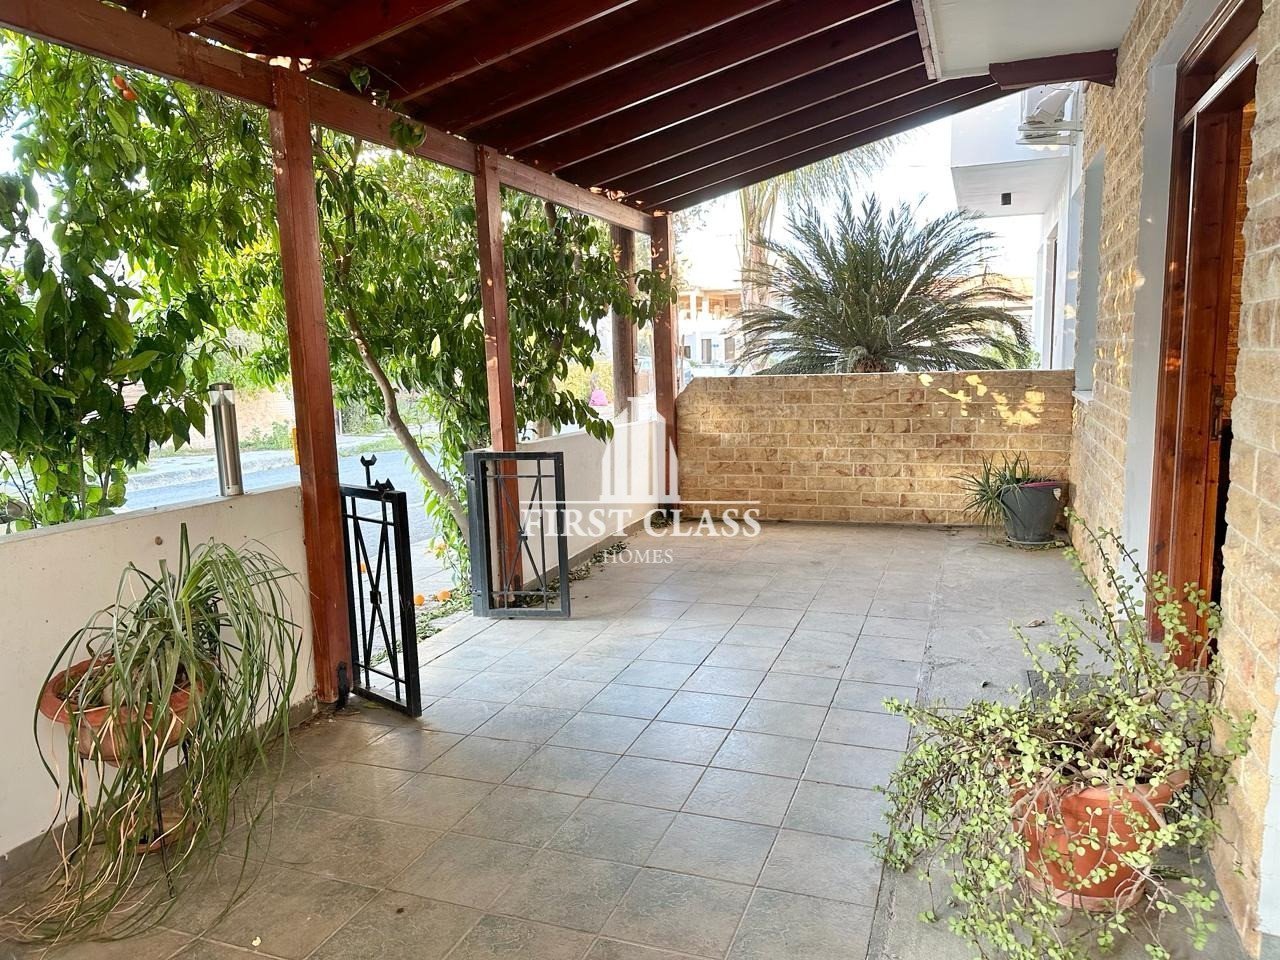 Property for Rent: House (Semi detached) in Strovolos, Nicosia for Rent | Key Realtor Cyprus